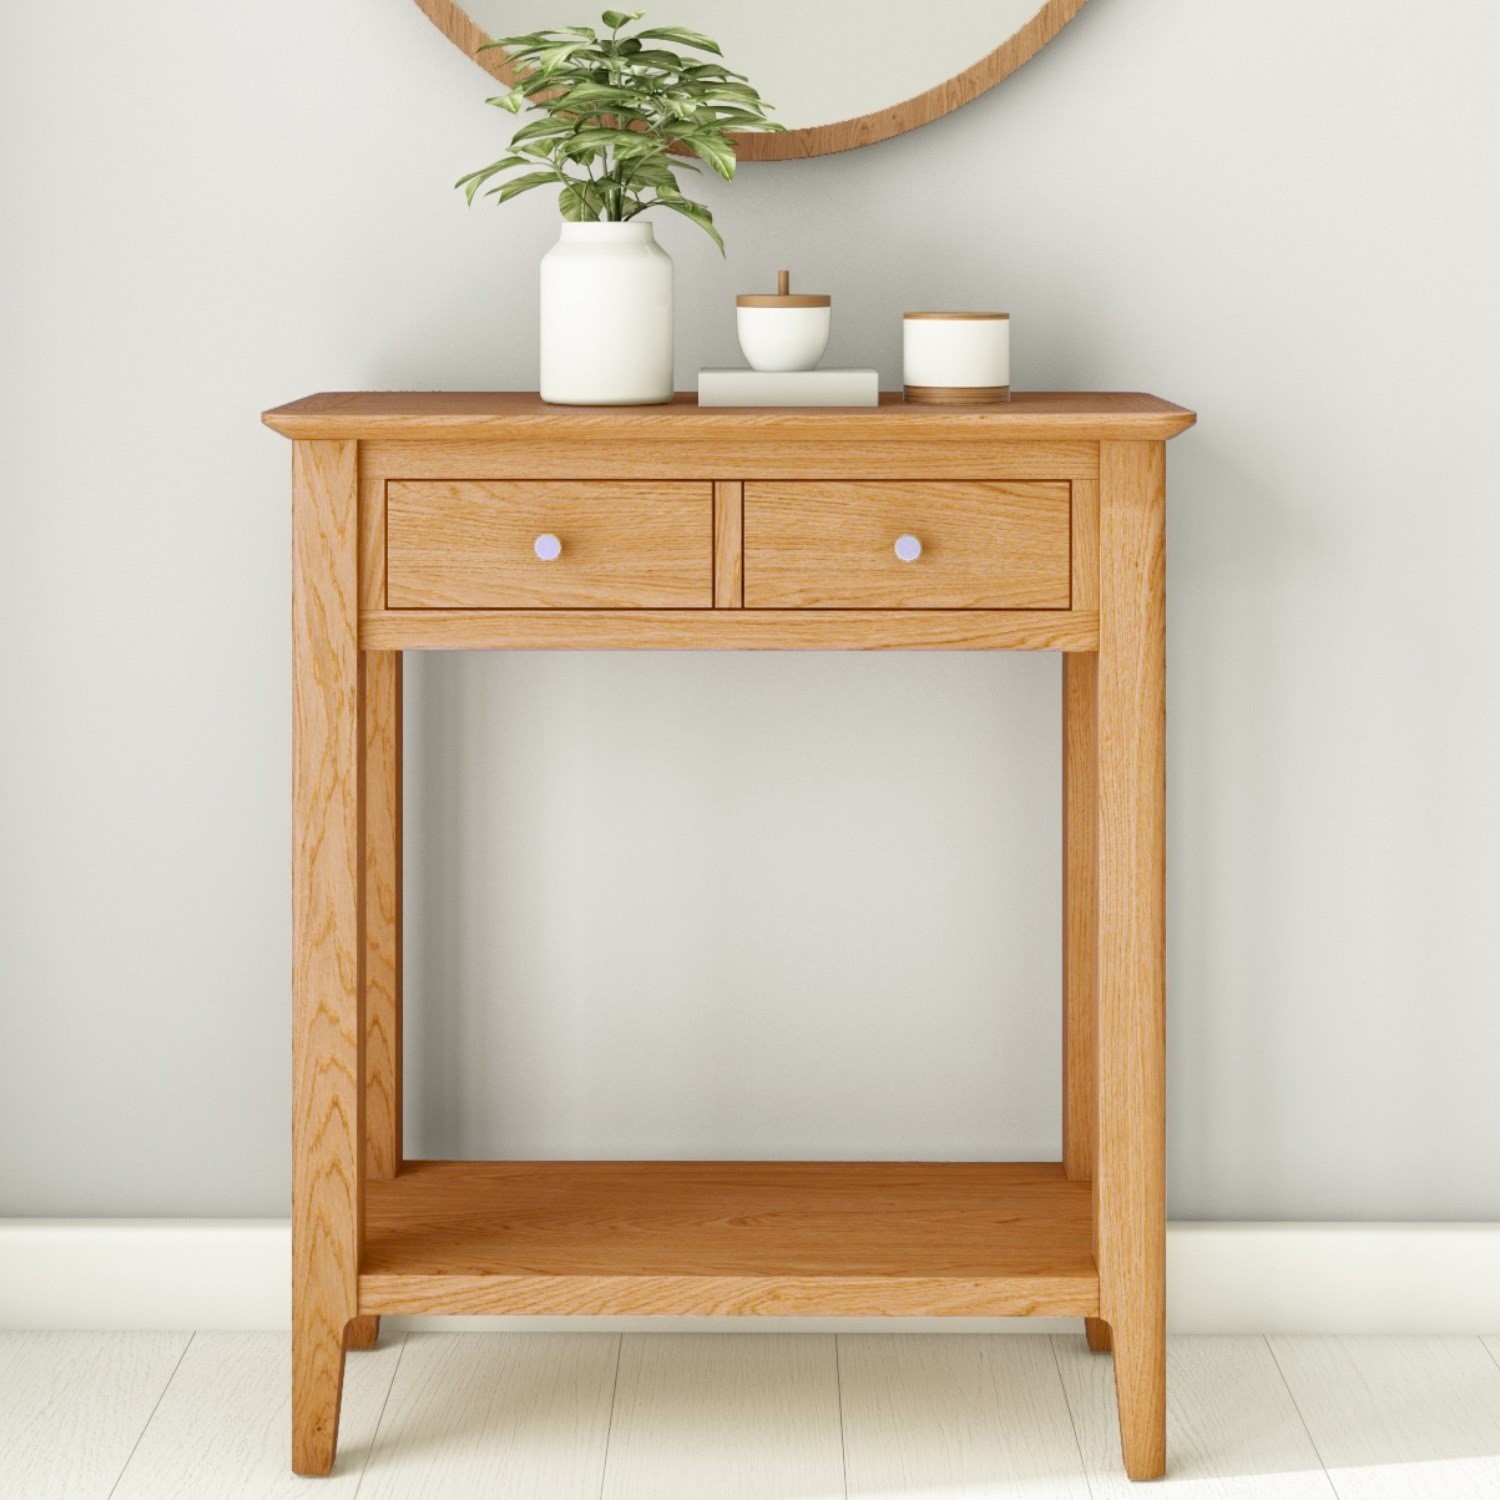 Photo of Narrow solid oak console table with drawers - adeline